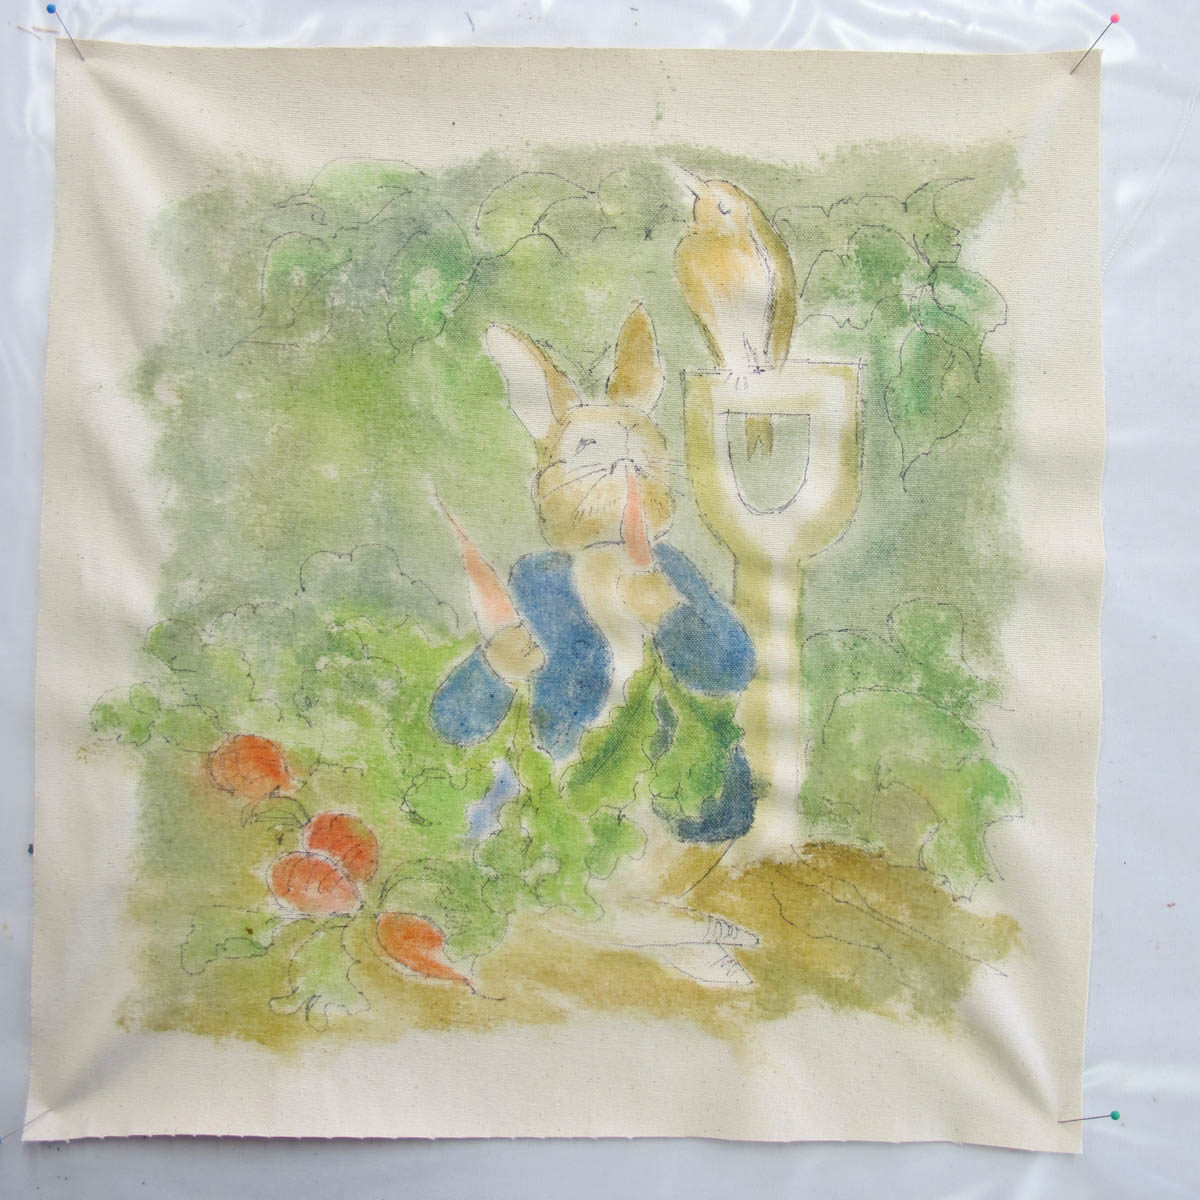 Peter Rabbit Wall Hanging - finished painting